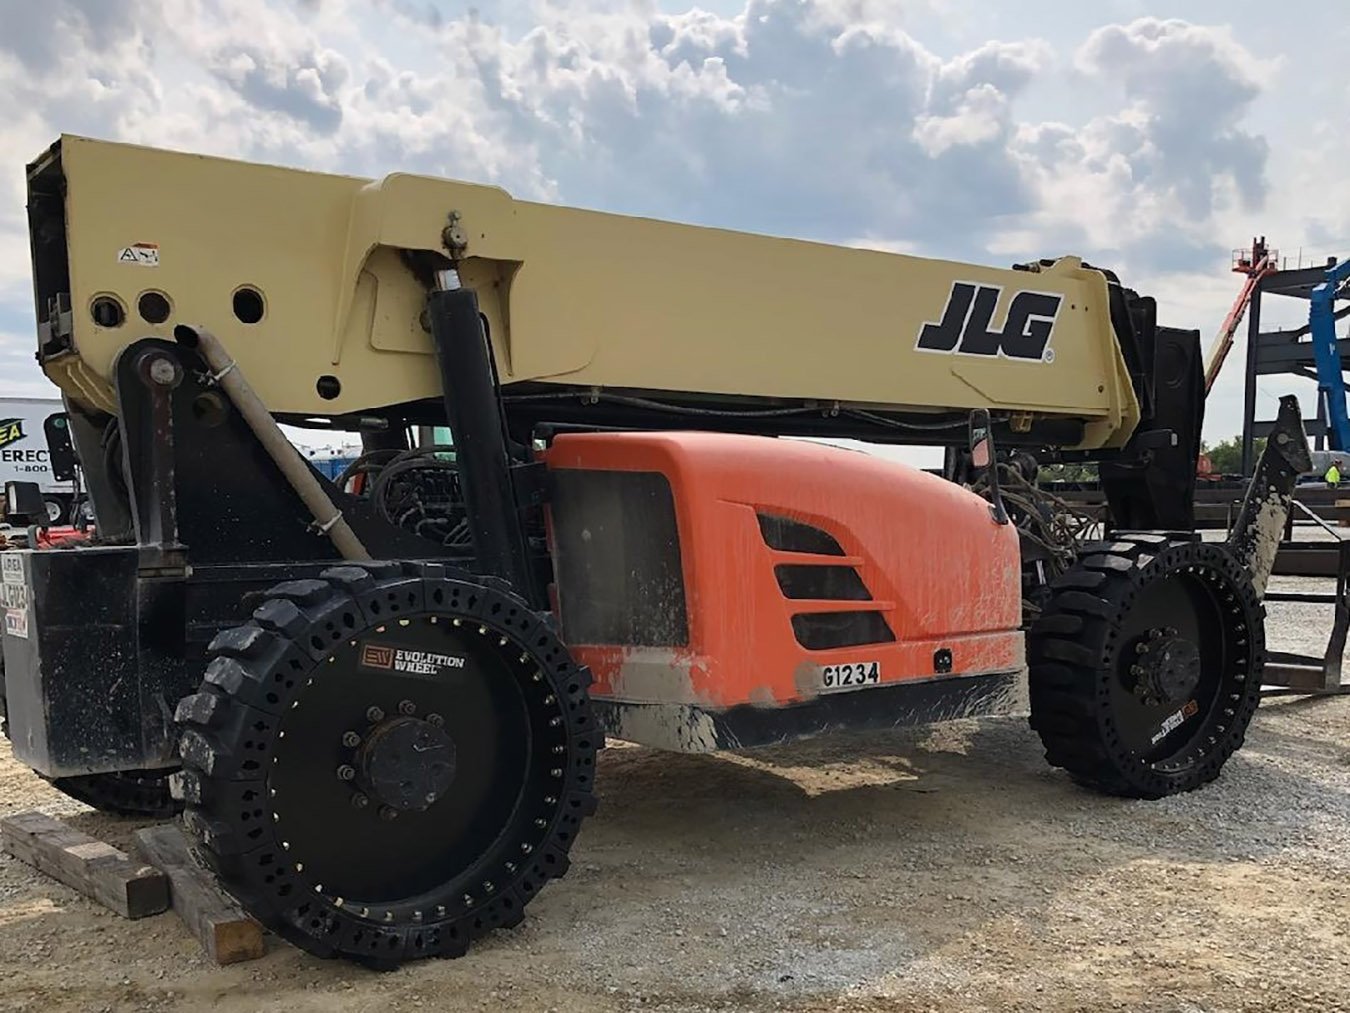 This image shows our Gradall tires on a JLG telehandler